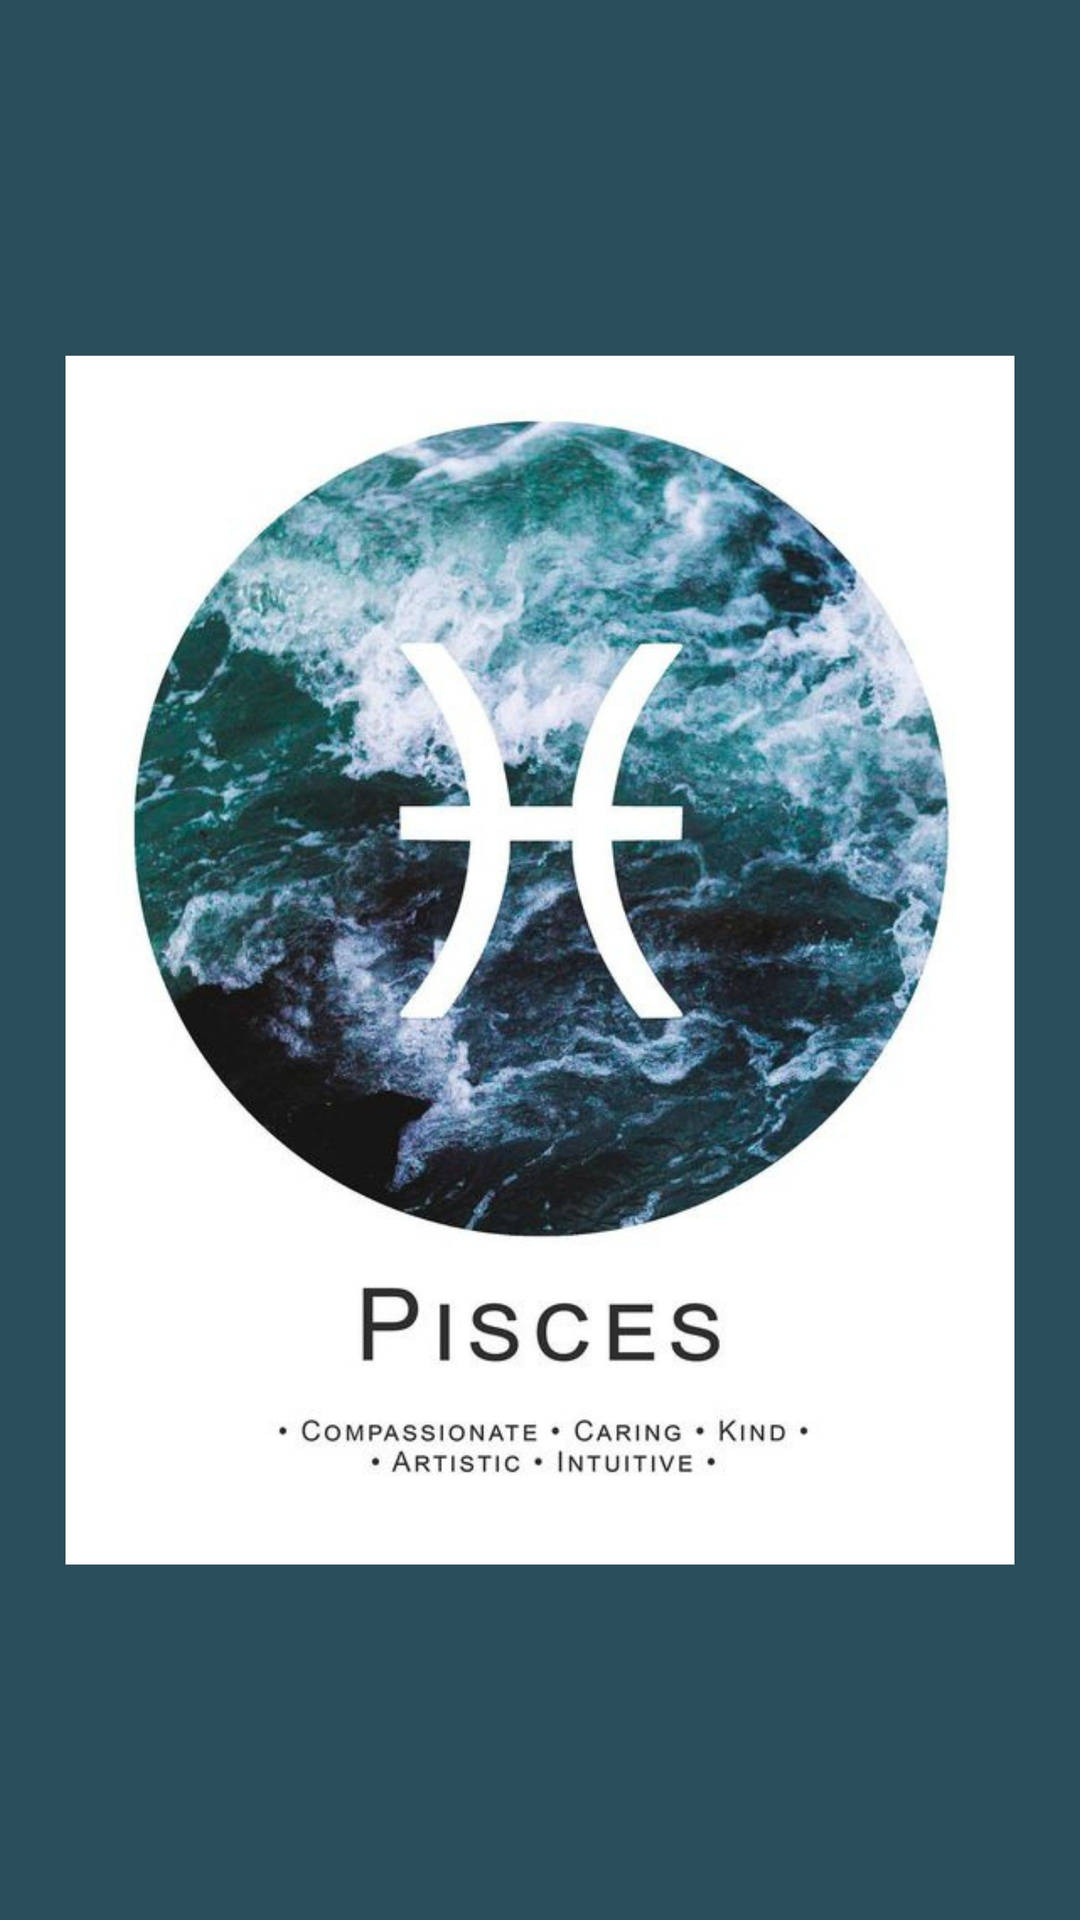 Pisces Ocean Symbol And Text